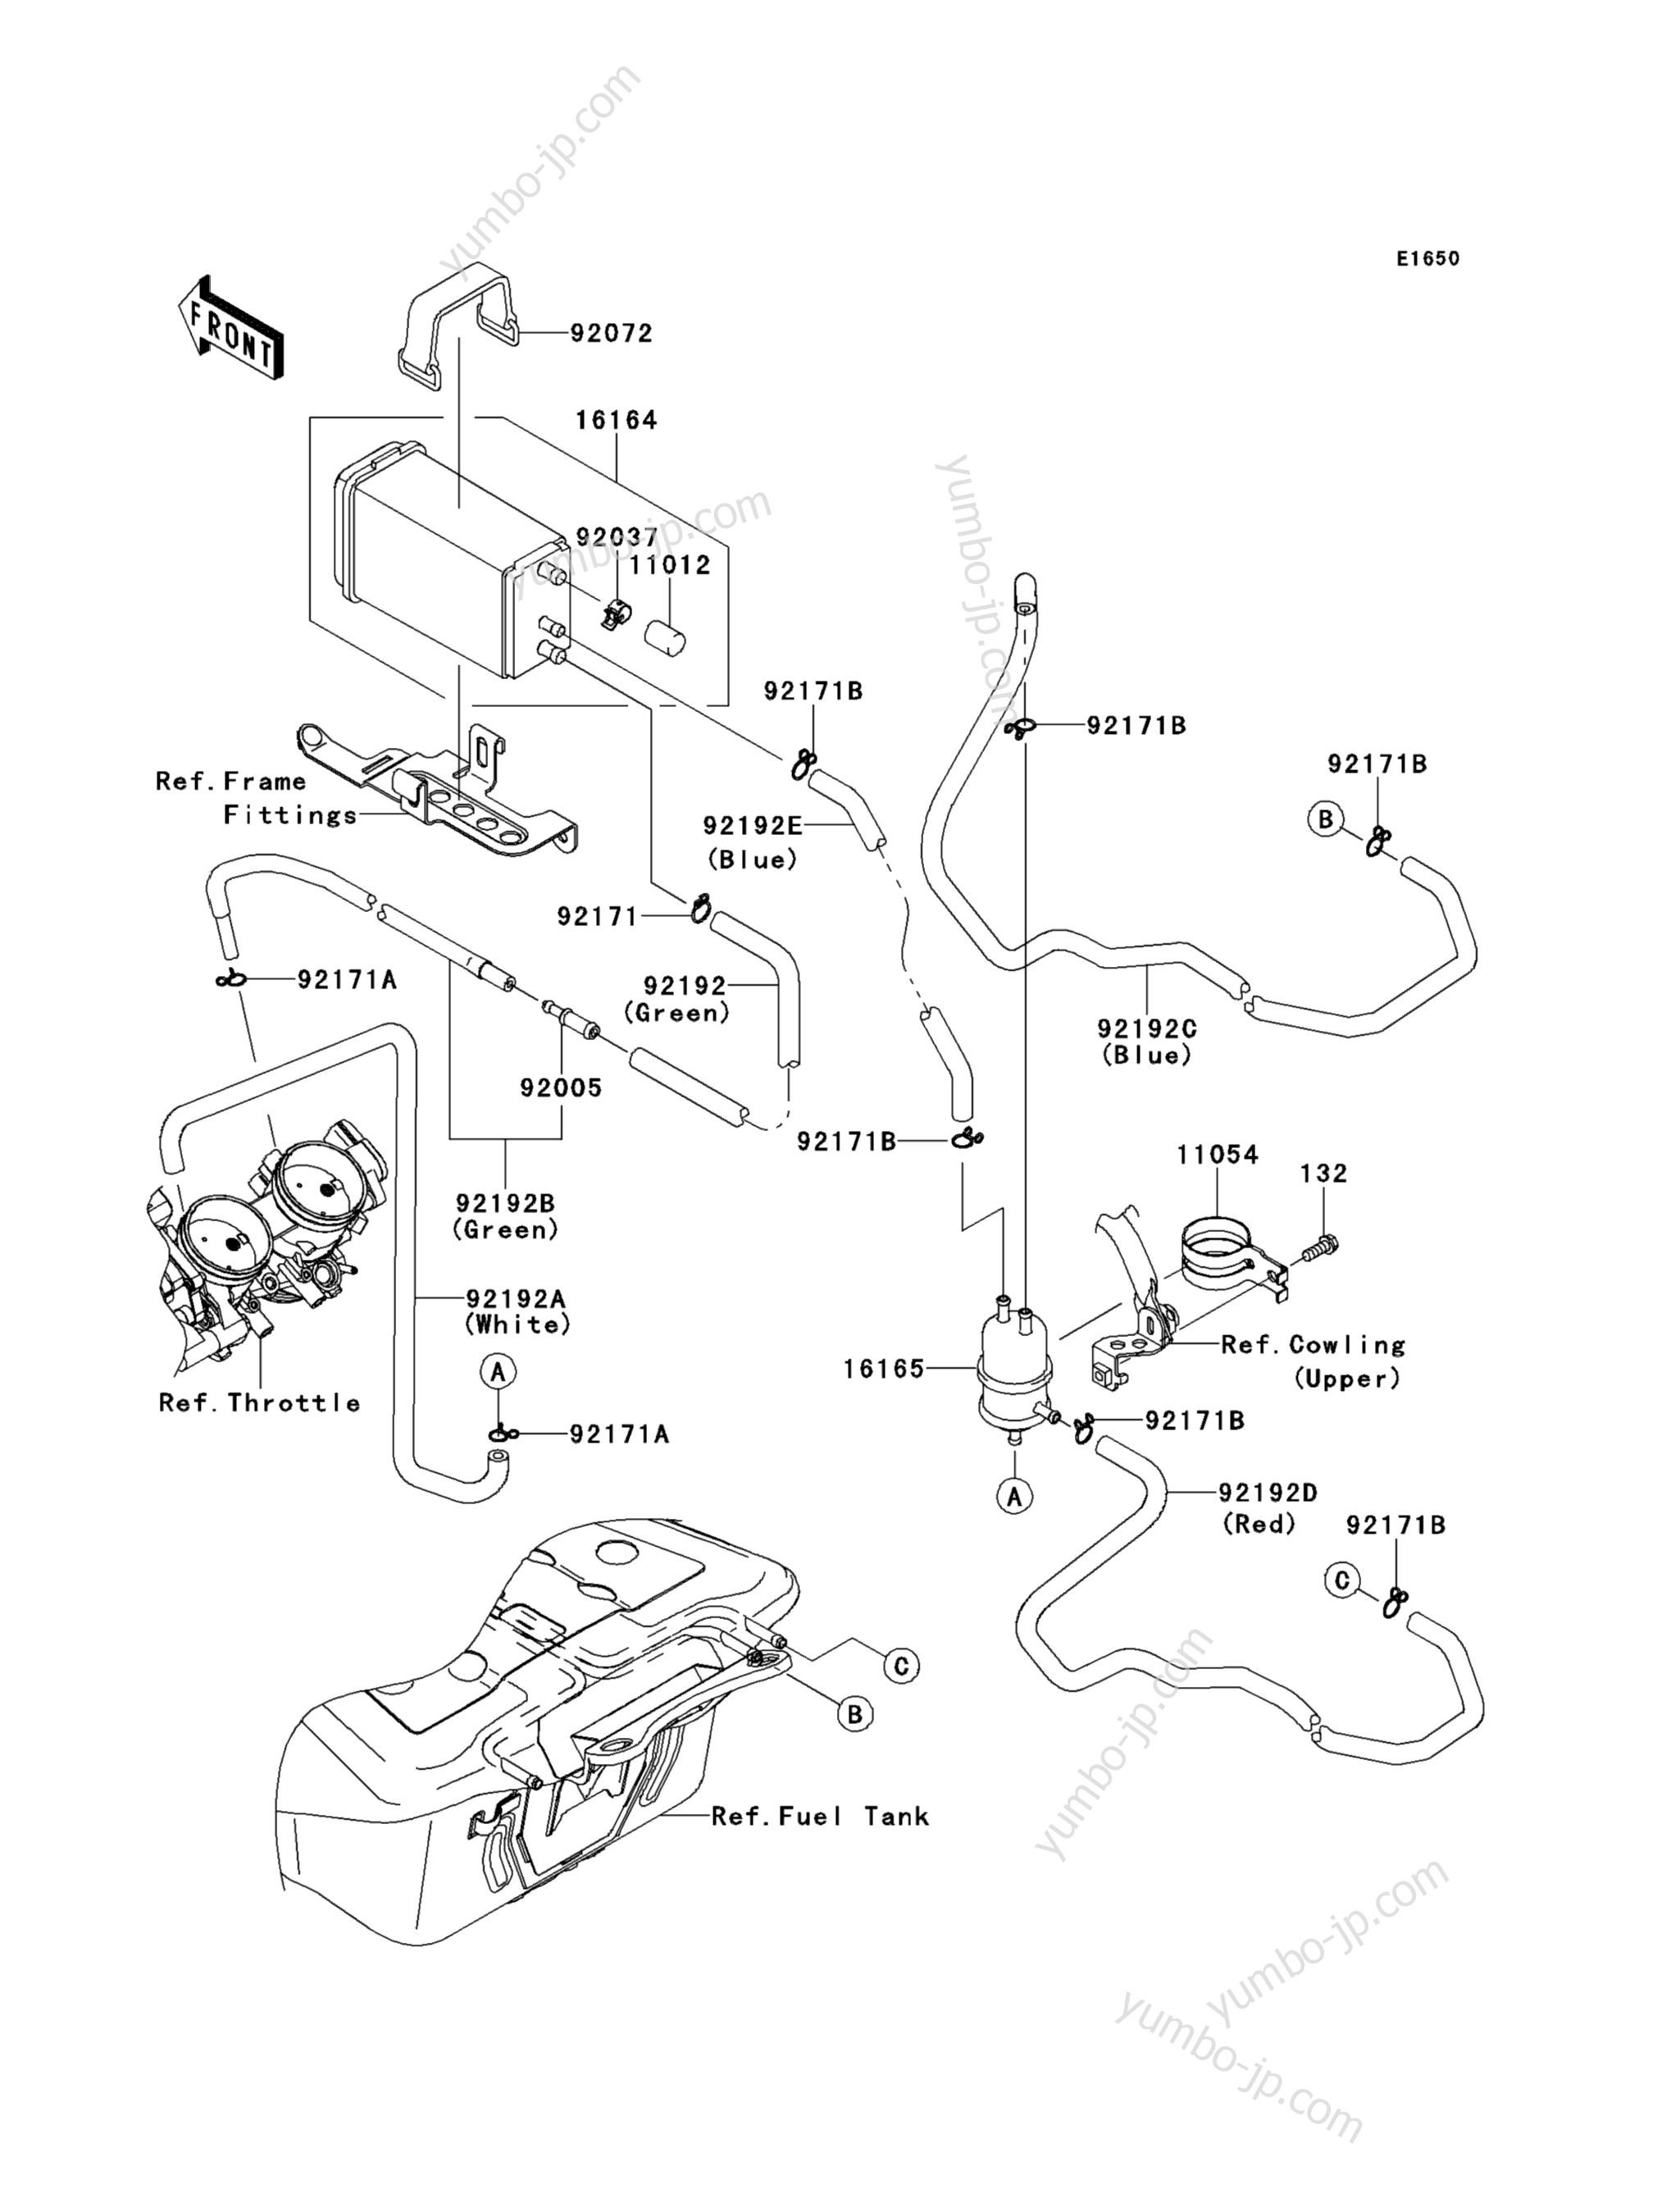 Fuel Evaporative System(CA) for motorcycles KAWASAKI CONCOURS 14 ABS (ZG1400CAF) 2010 year